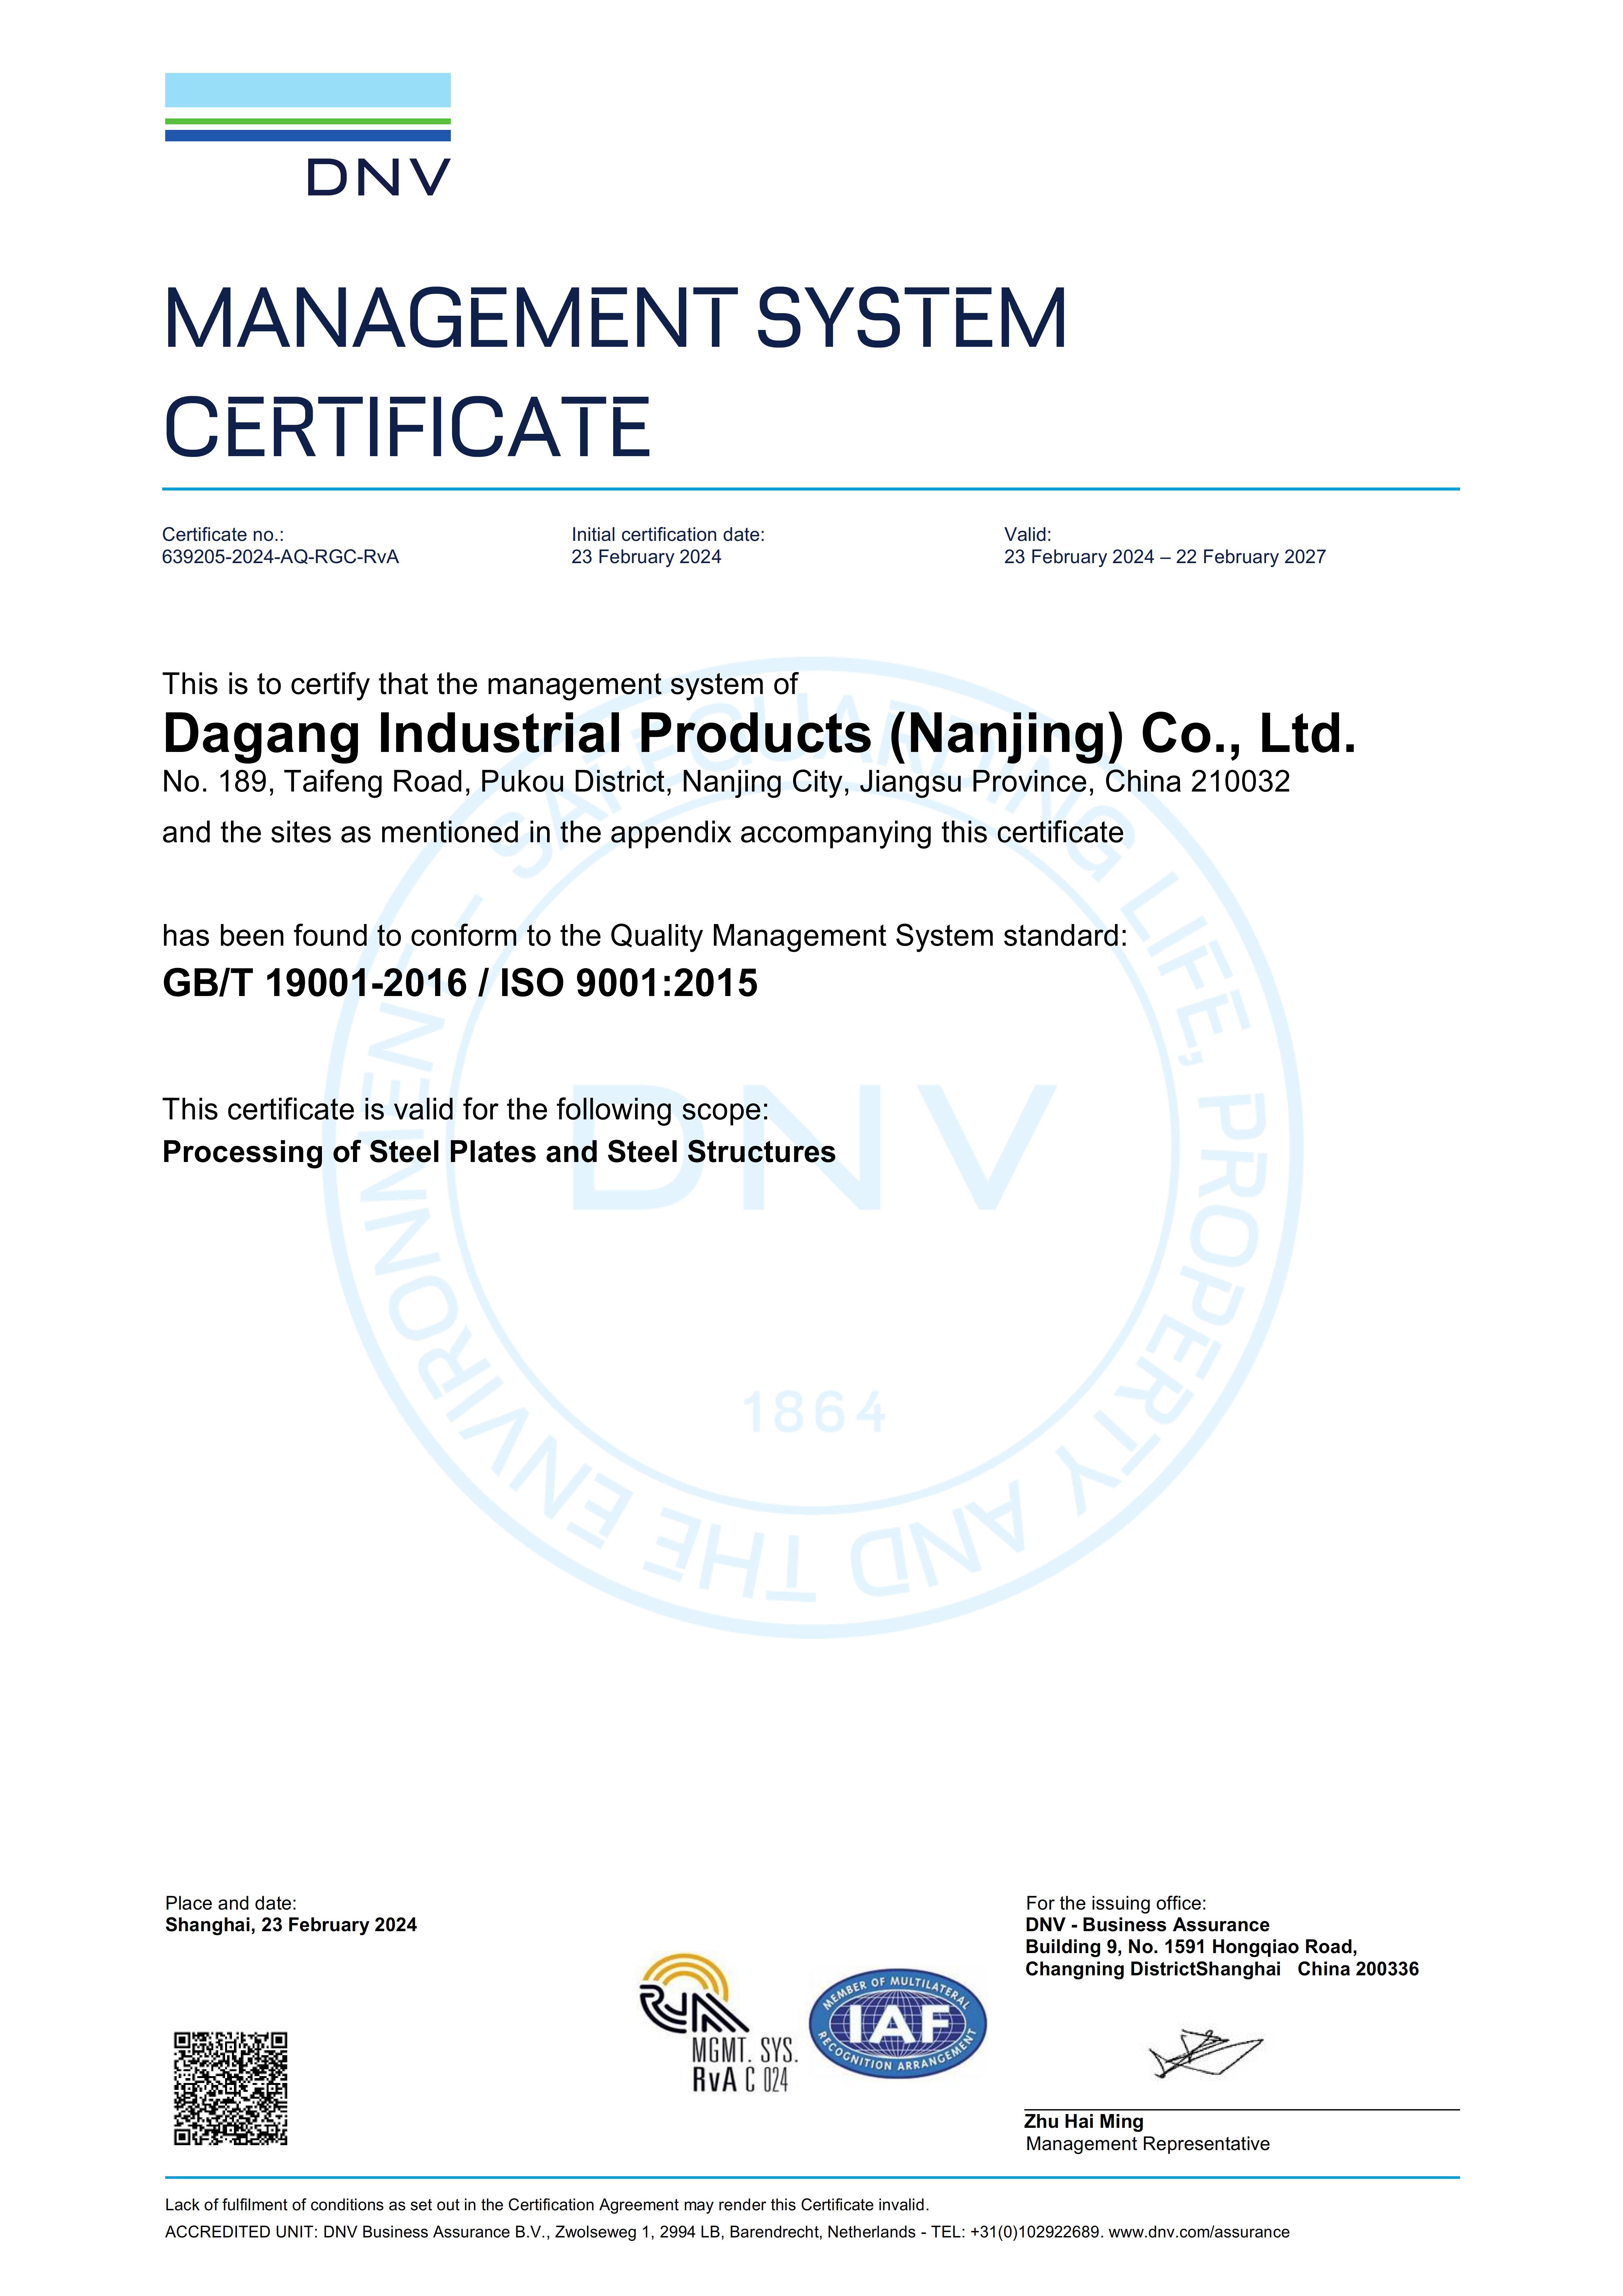 DASCO has passed the DNV certification and obtained the relevant certificates